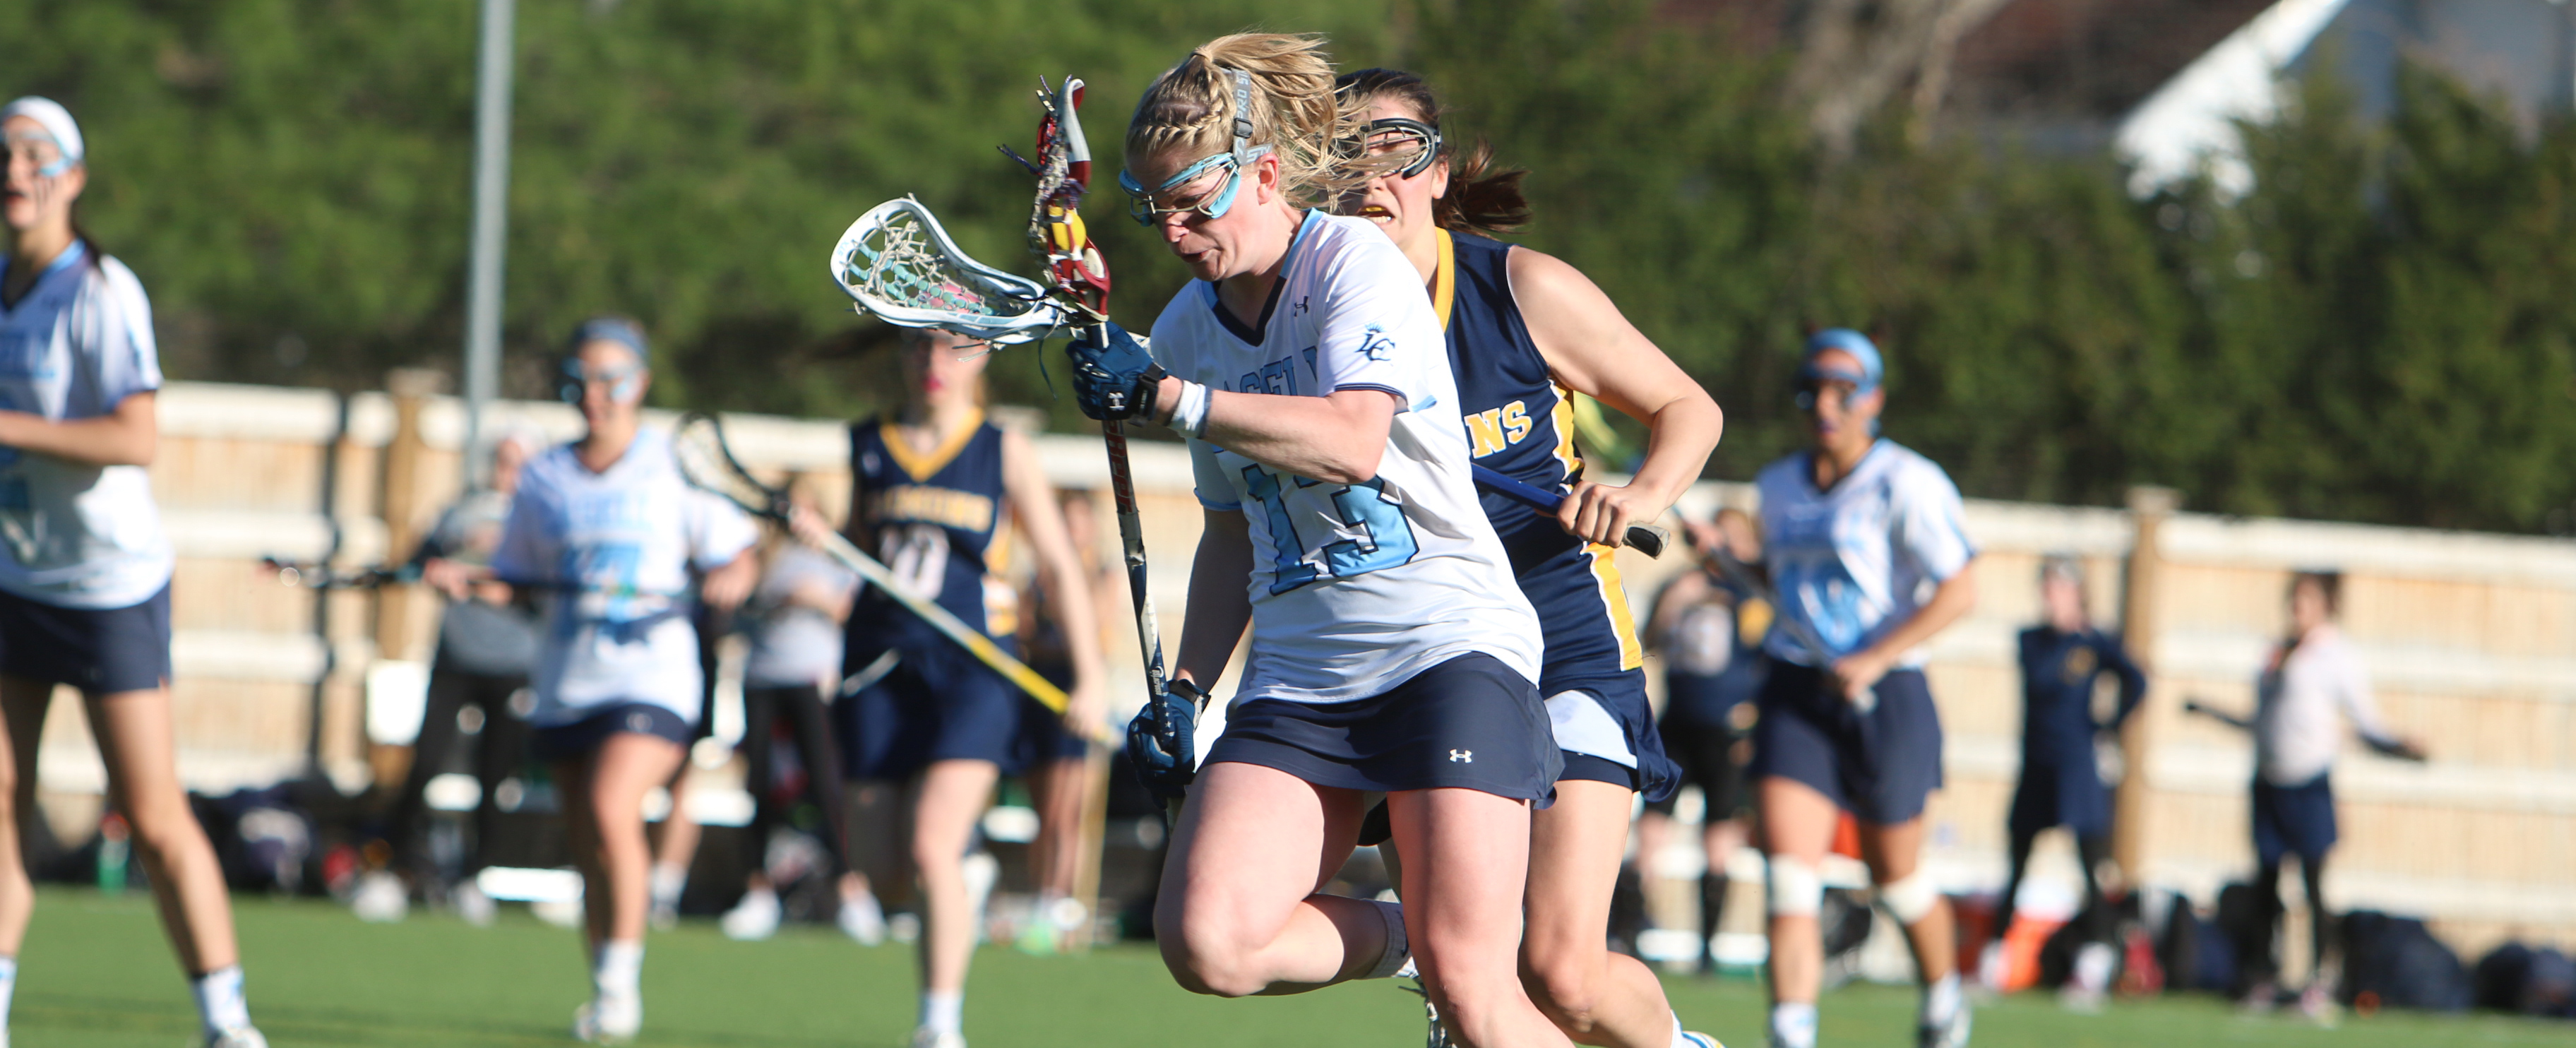 First Half Surge Lifts Women's Lacrosse over Simmons 19-9